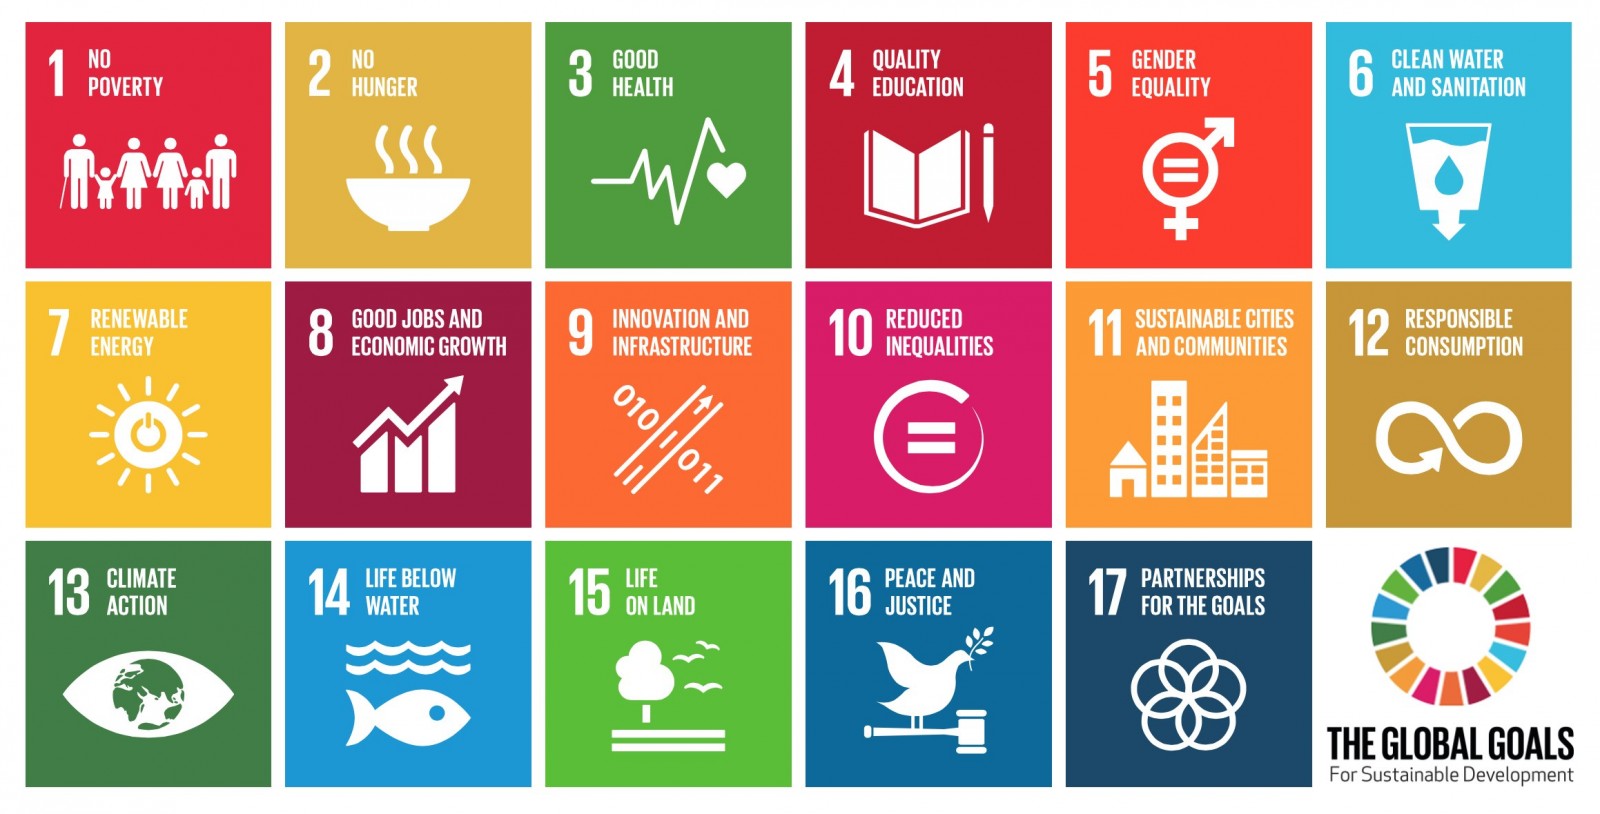 The 17 Sustainable Development Goals were adopted by all UN member states in 2015.